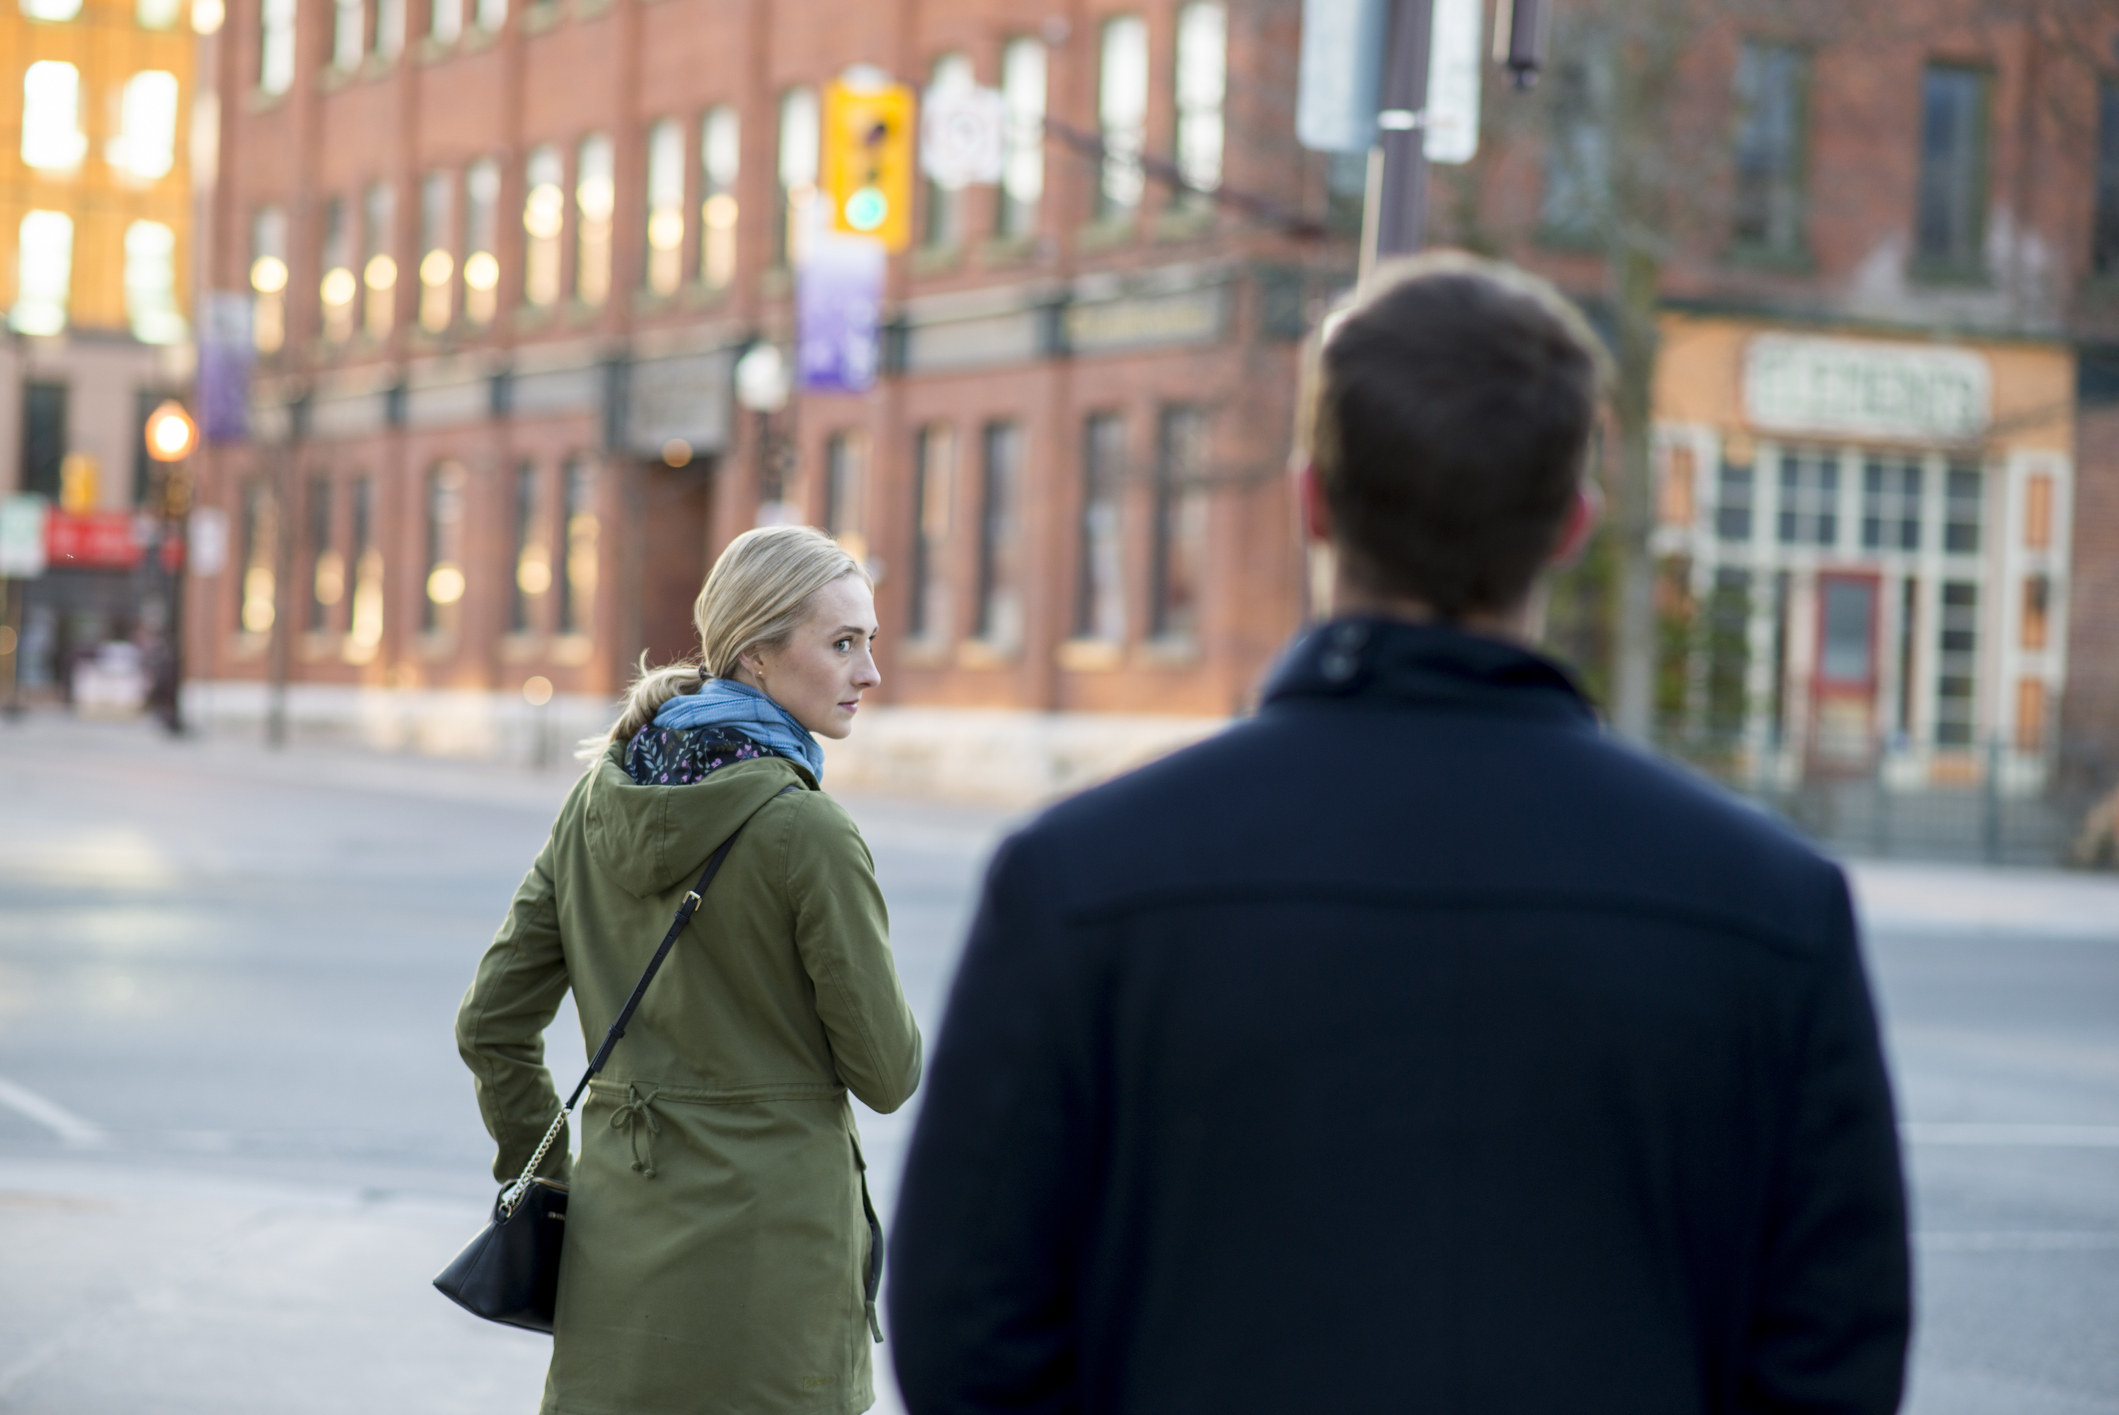 Woman looks back over shoulder at a man following her